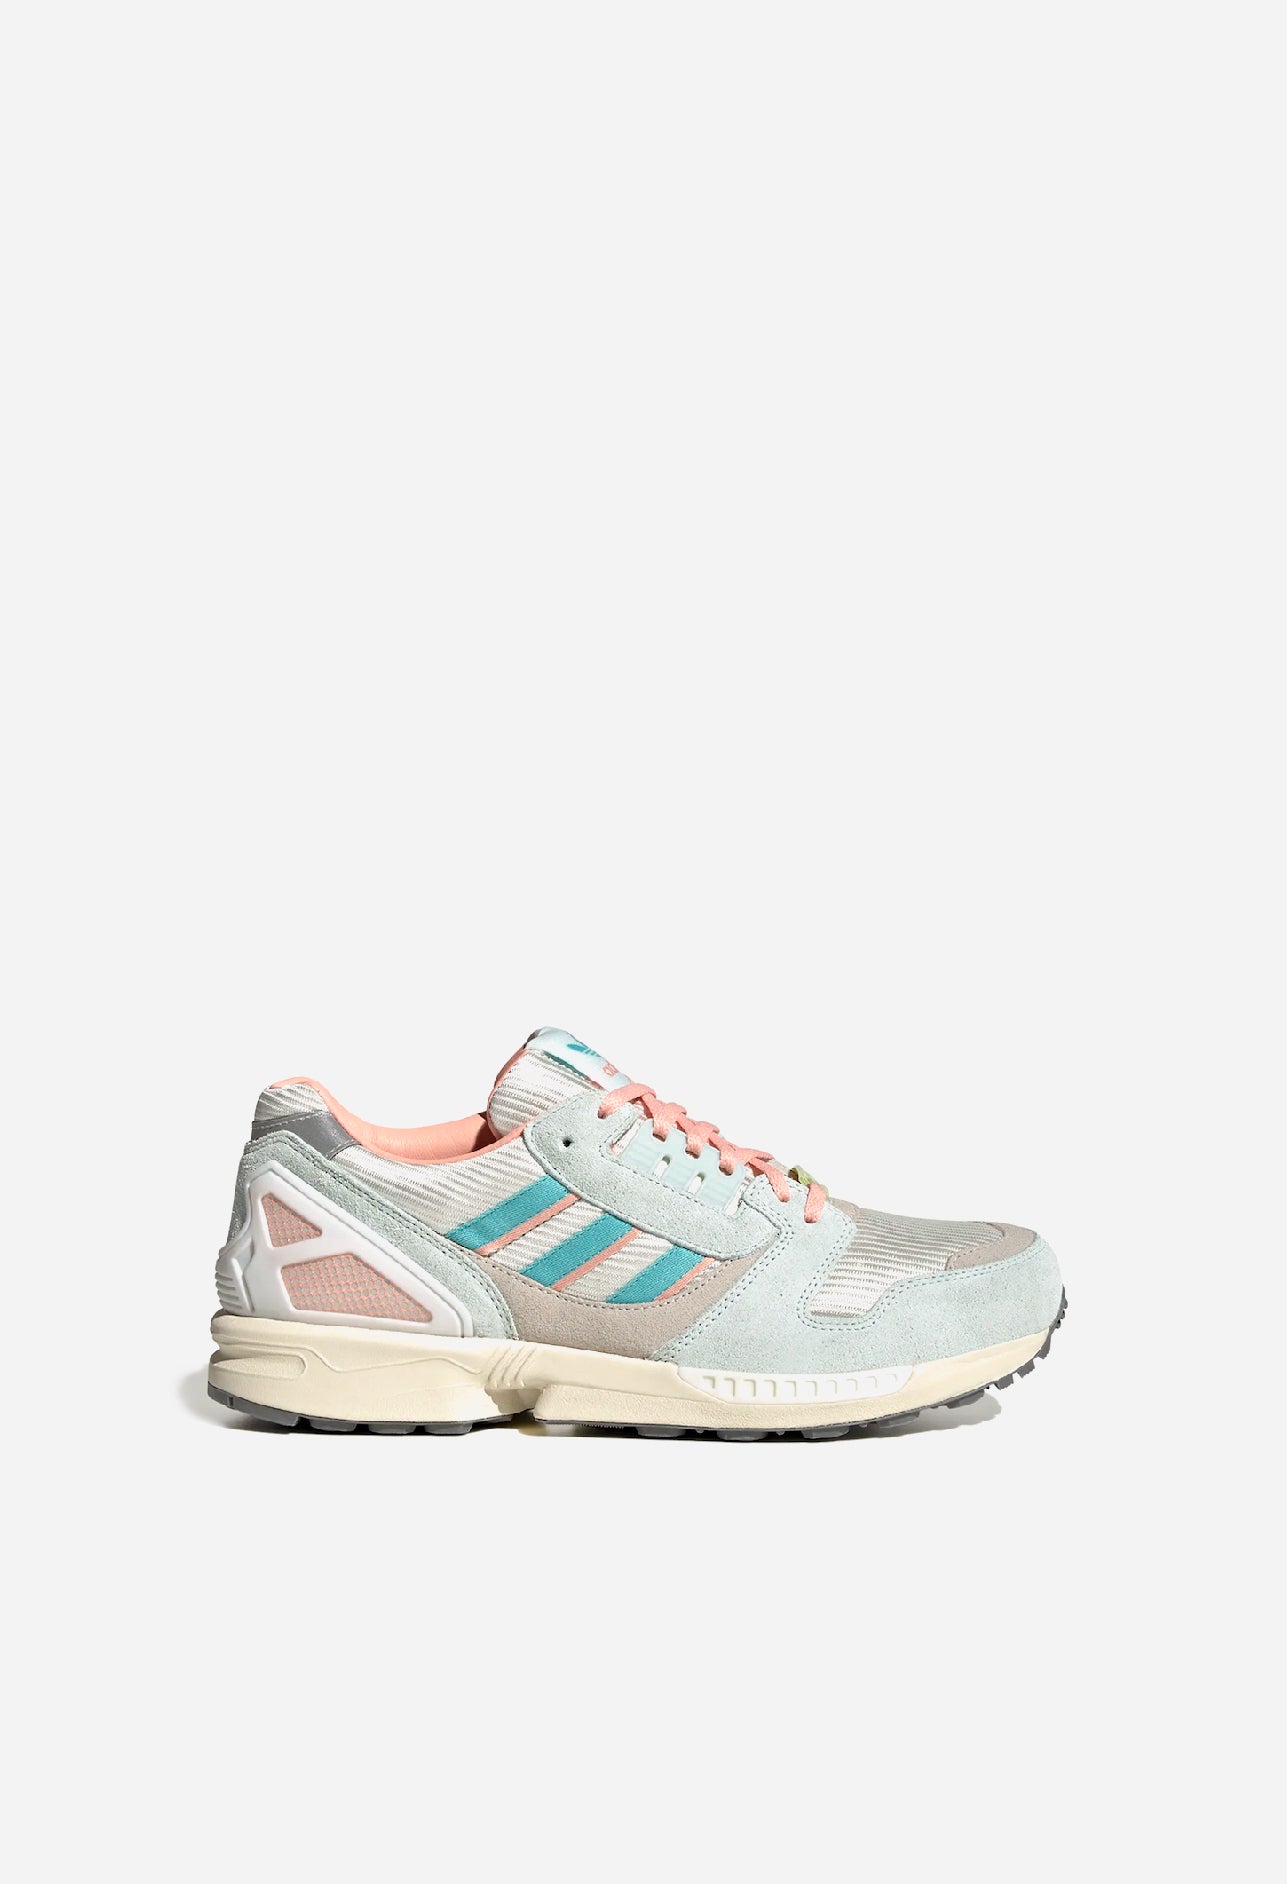 Adidas ZX 8000 Shoes